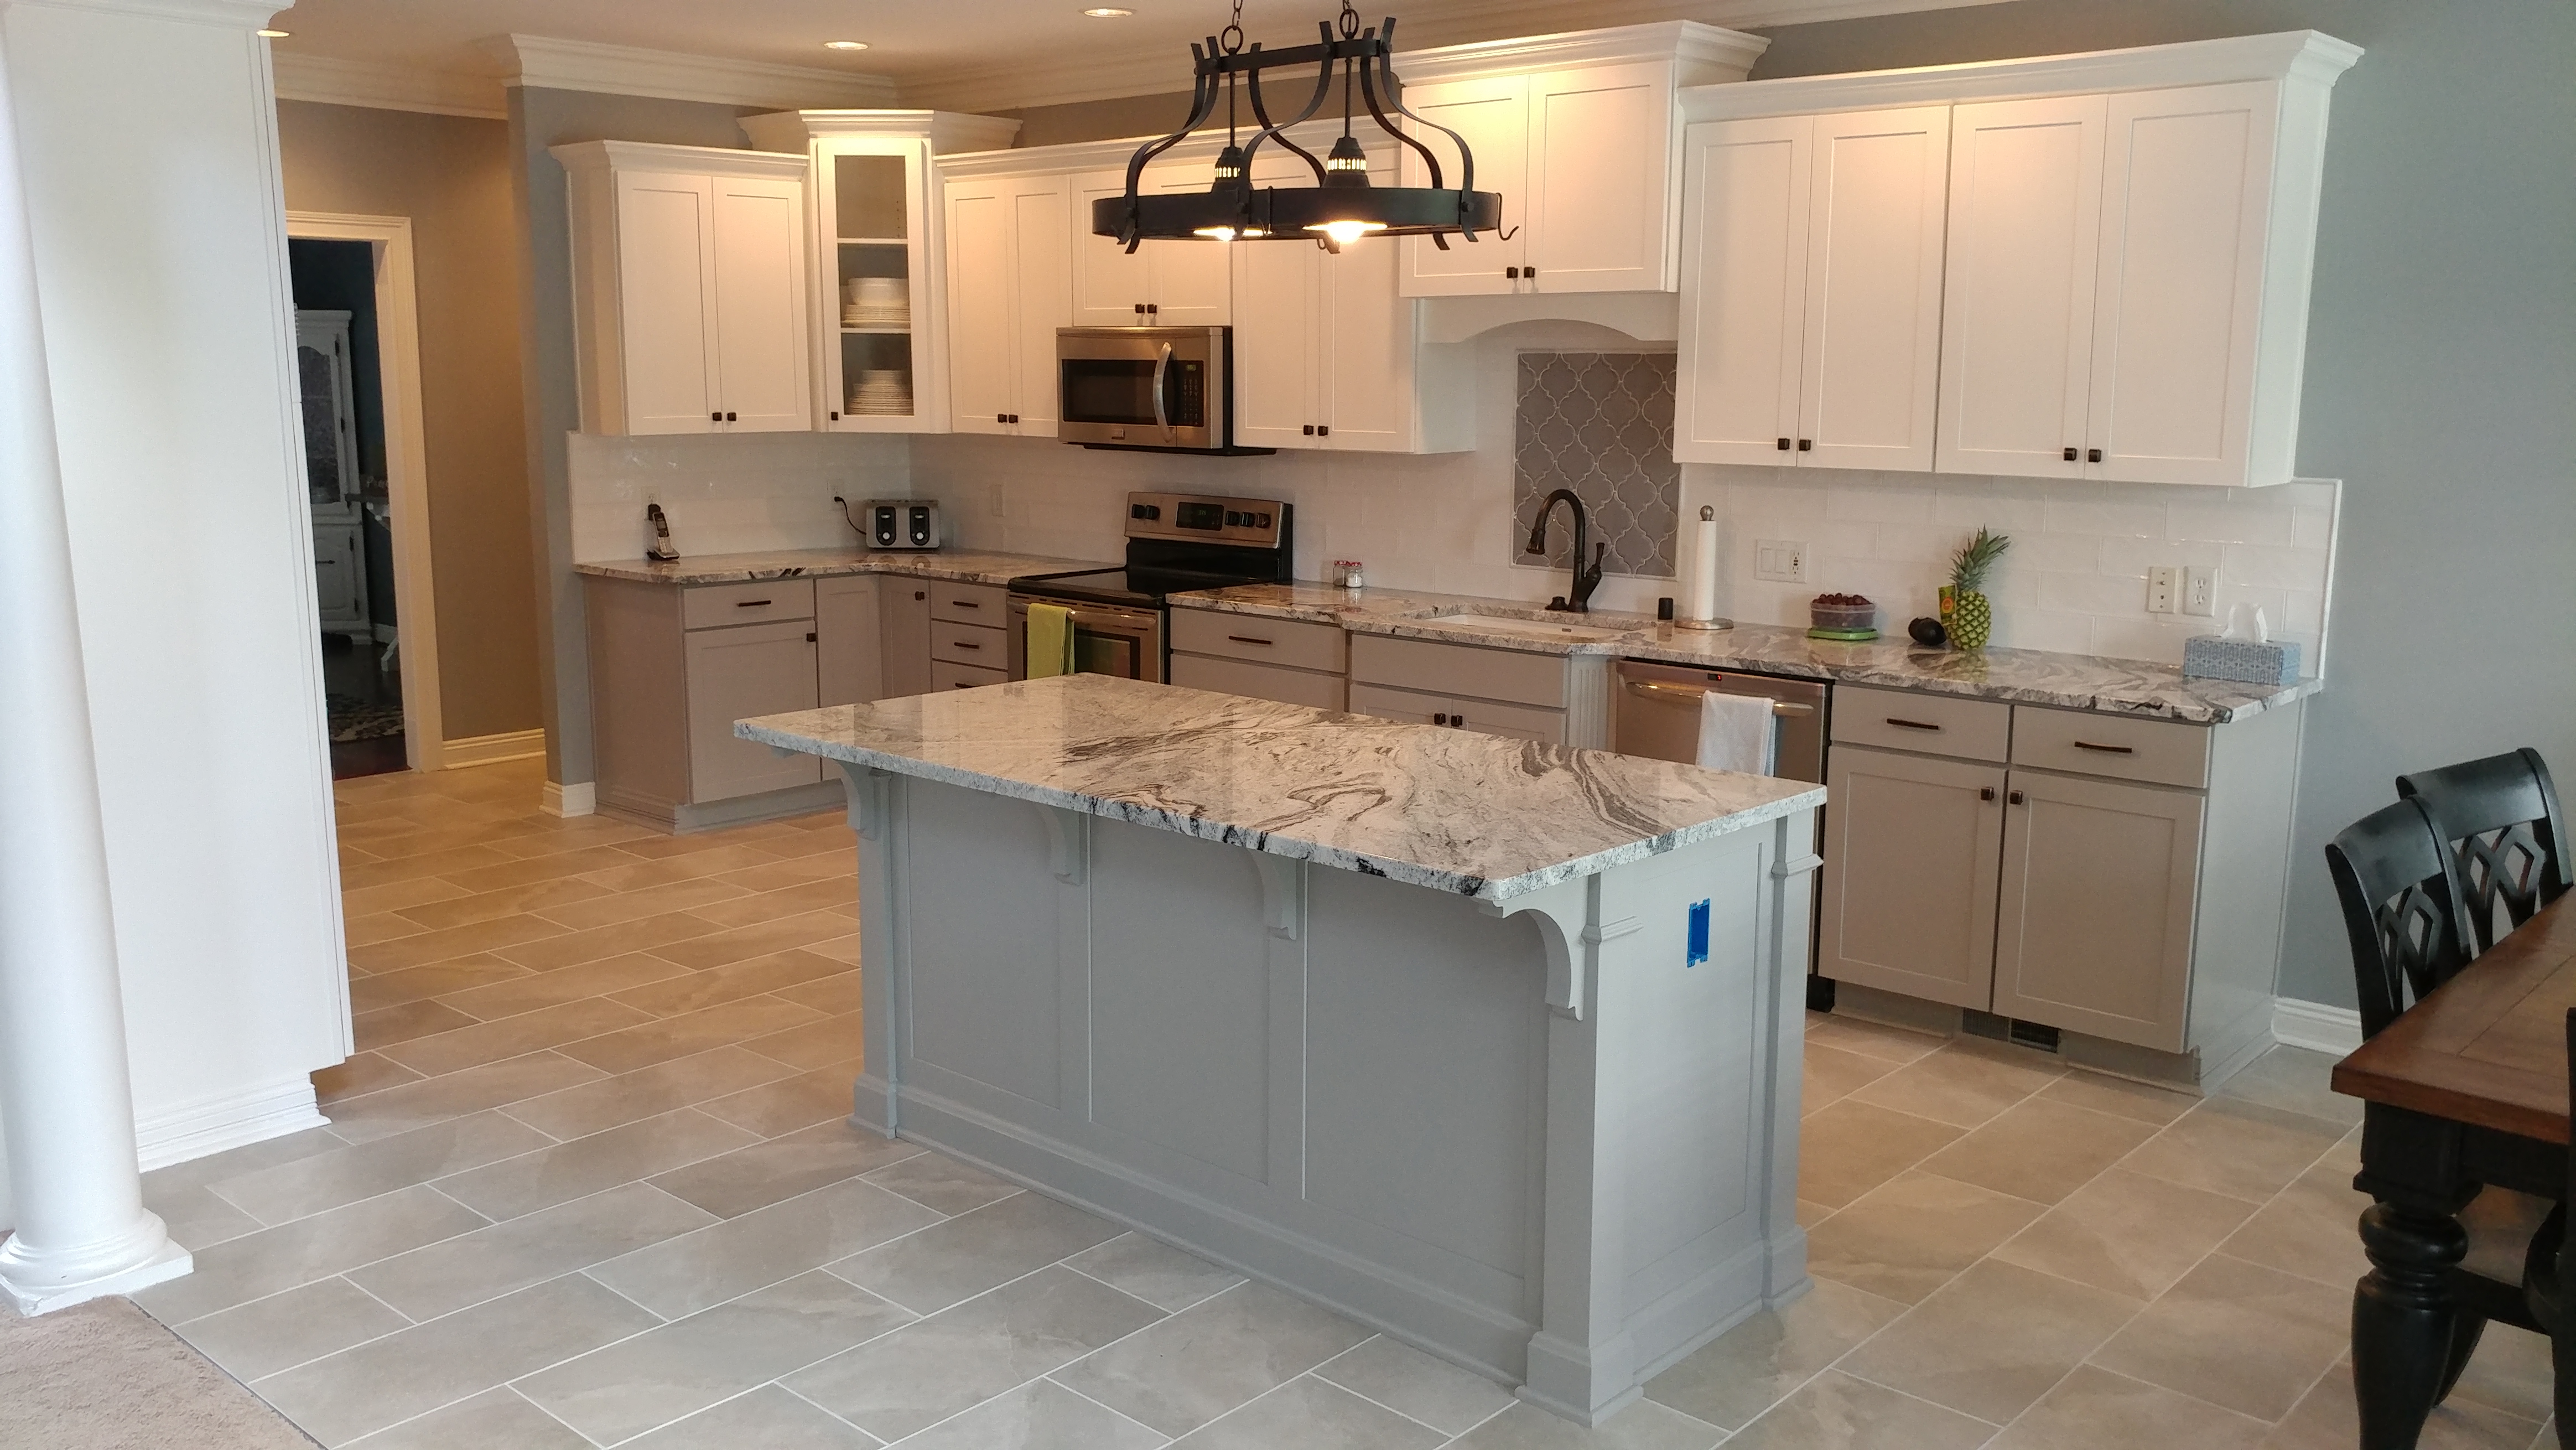 Final out of Kitchen Remodel in Glenmary Subdivision in Louisville, KY by Ryan Bruzan.  Features new Shaker doors with concealed, soft-close hinges; lacquer painted cabinets; a new custom island; new tile backsplash and granite countertops.